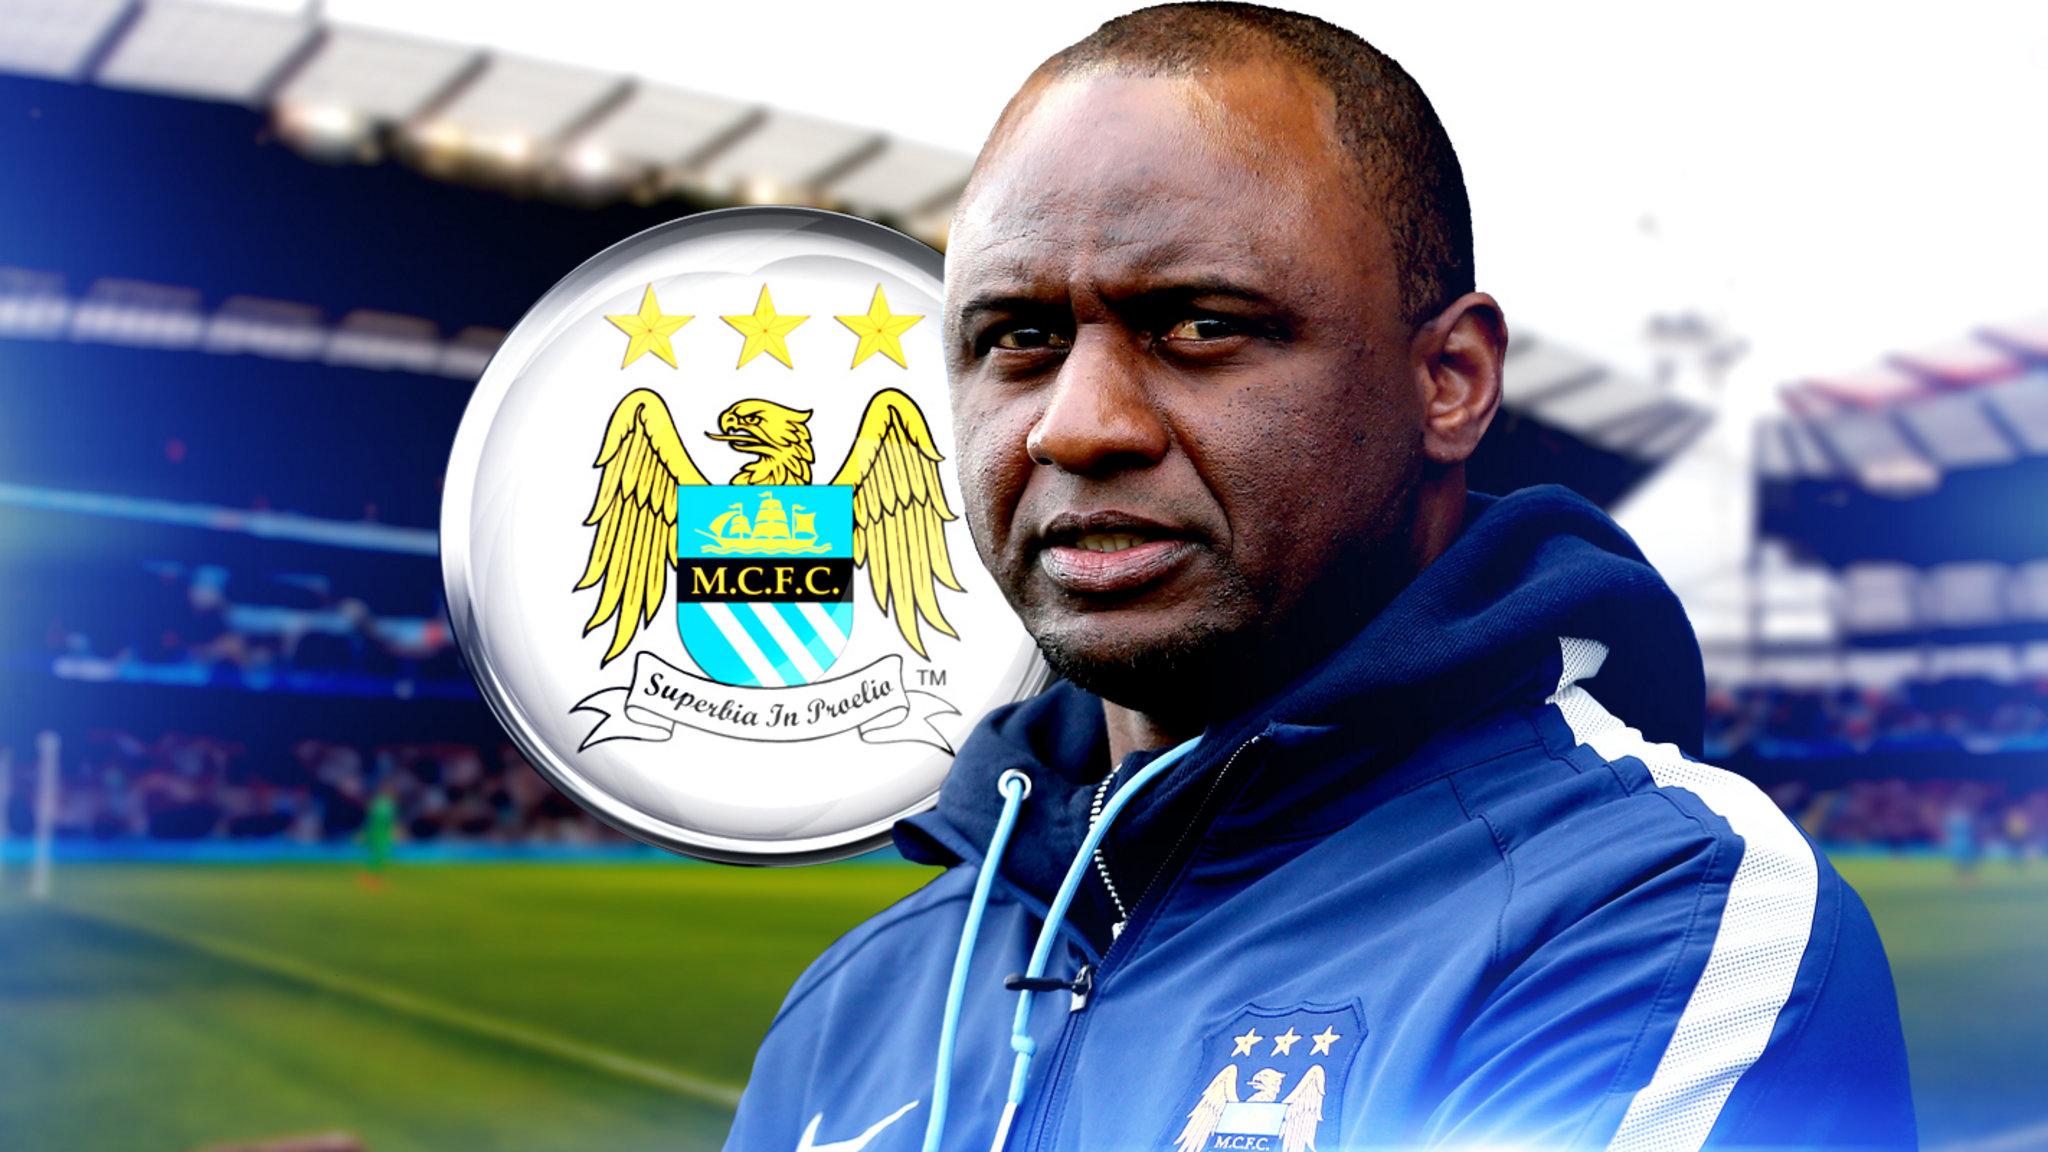 Patrick Vieira earmarked as potential Manchester City manager, says